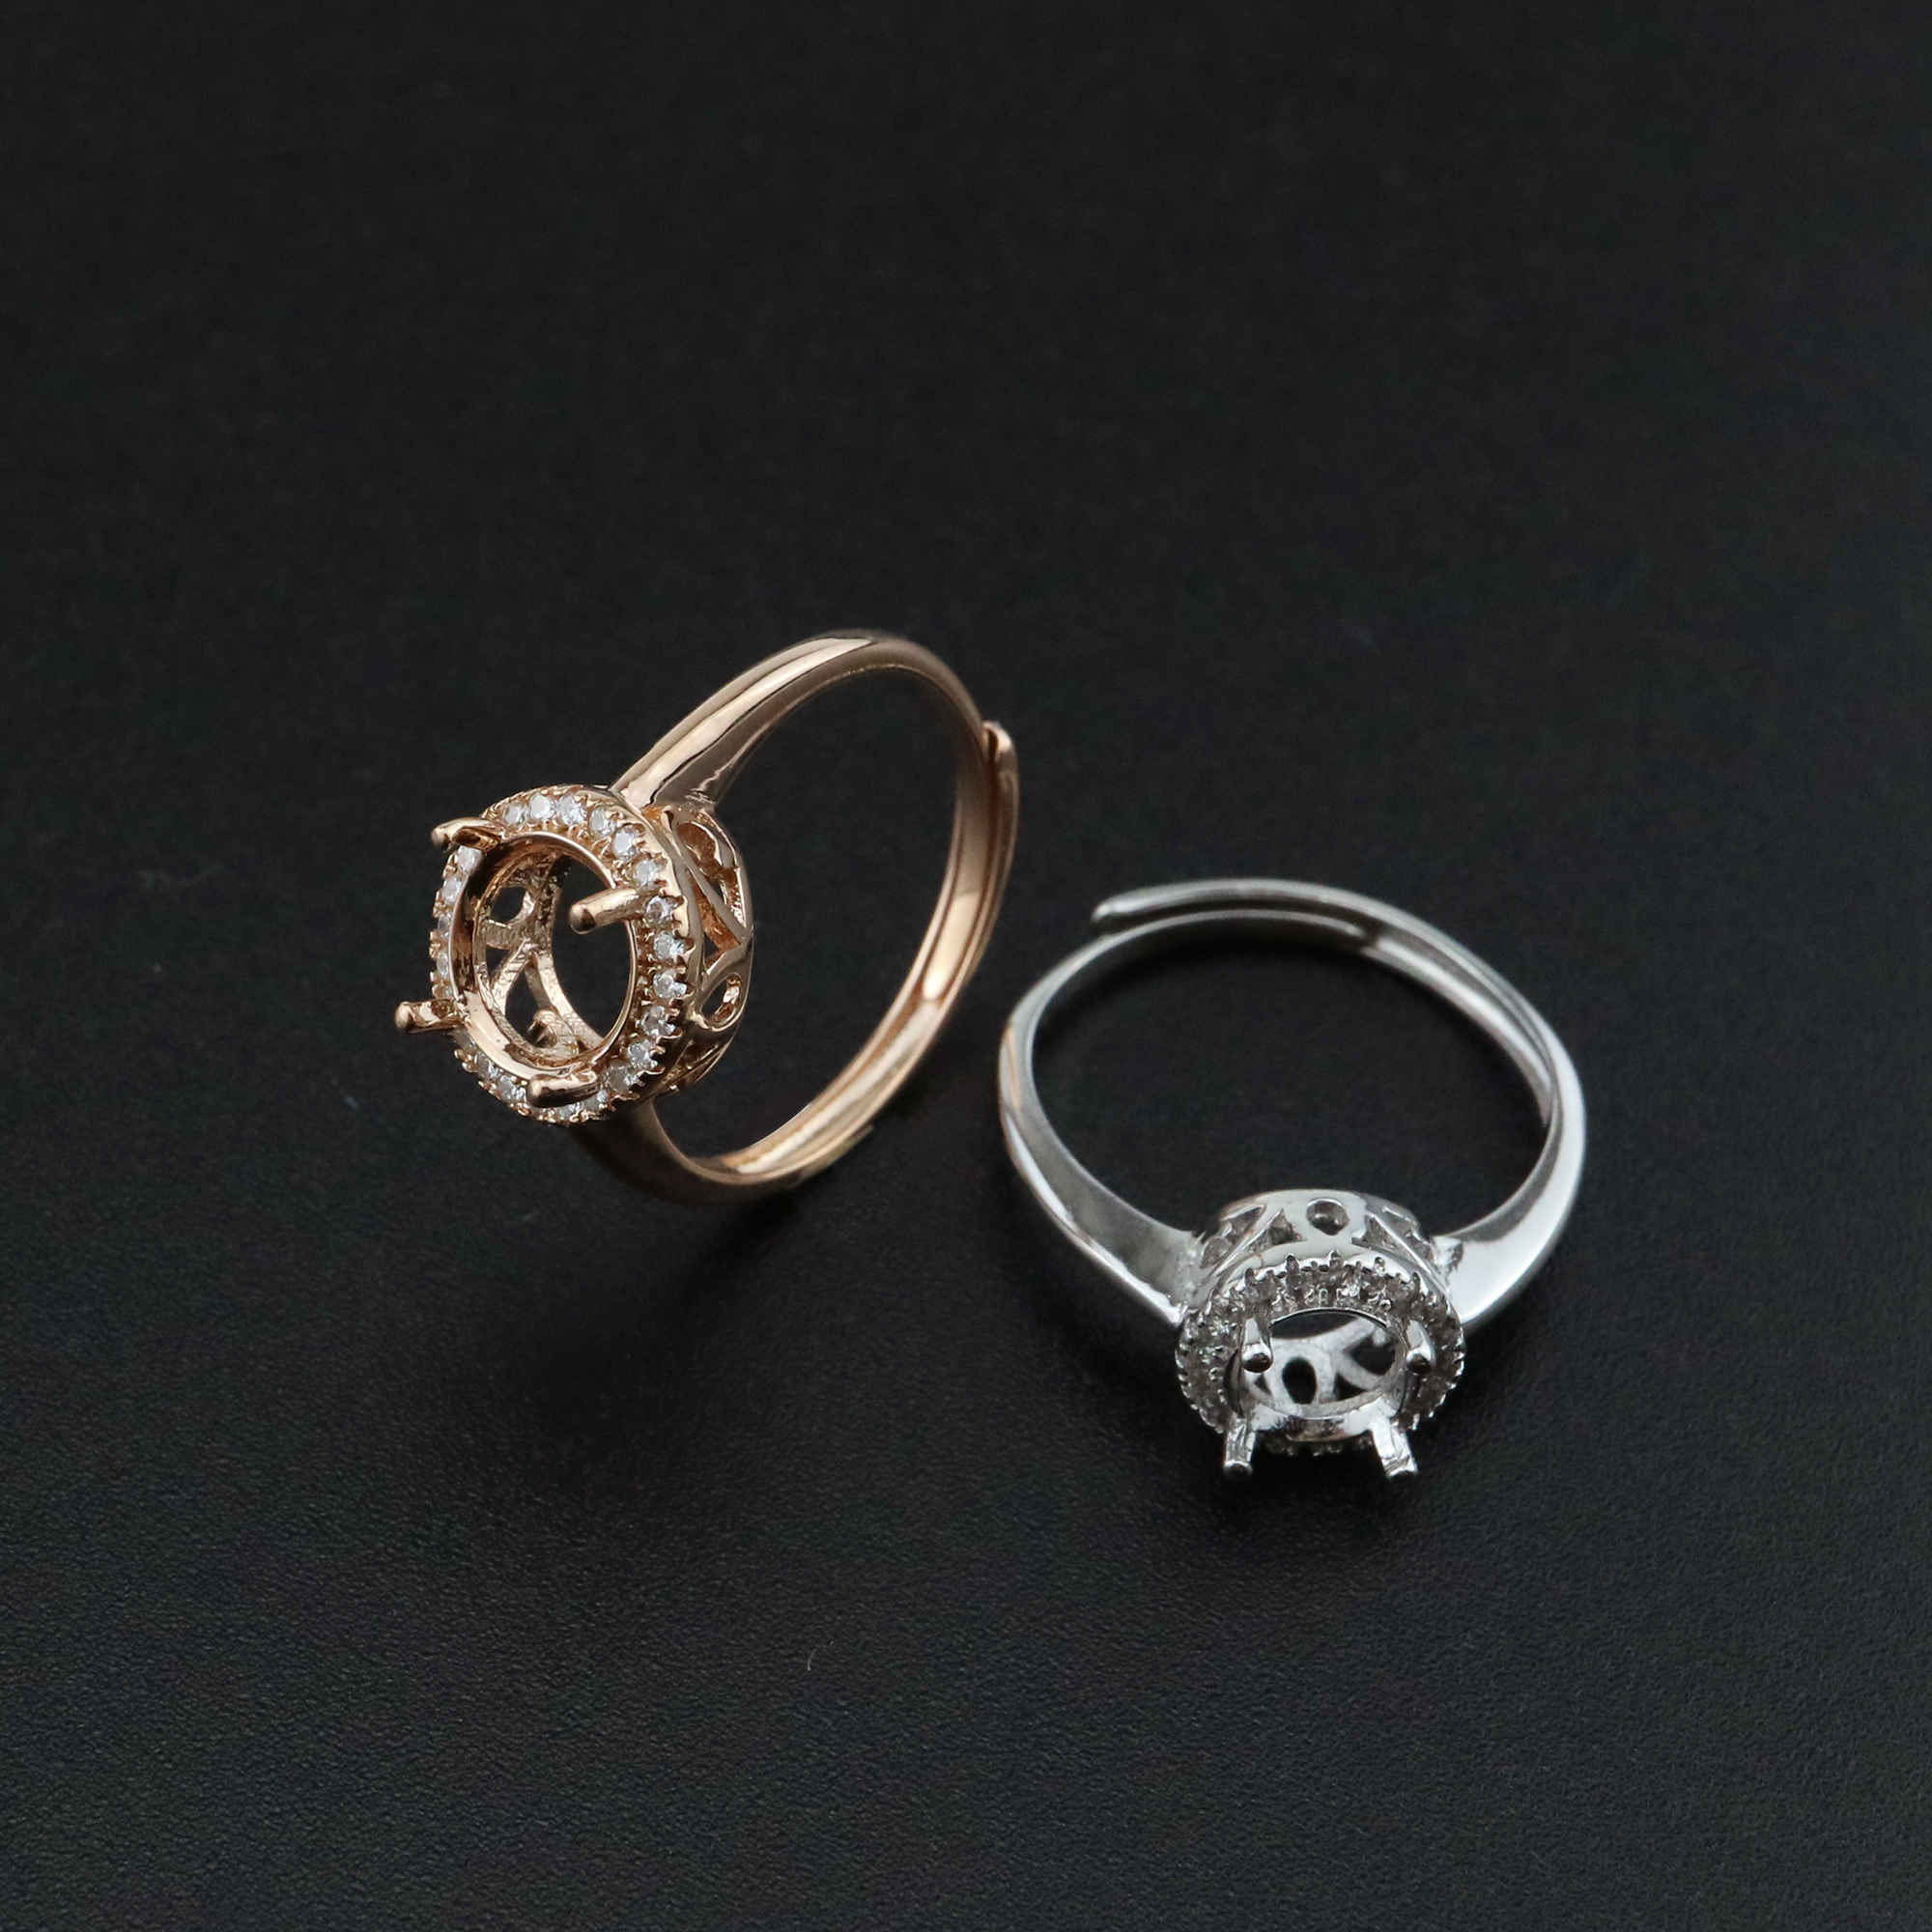 1Pcs 6.5-9MM Halo Round Prong Bezel Rose Gold Plated Solid 925 Sterling Silver Adjustable Ring Settings for Moissanite Gemstone DIY Supplies 1210054 - Click Image to Close